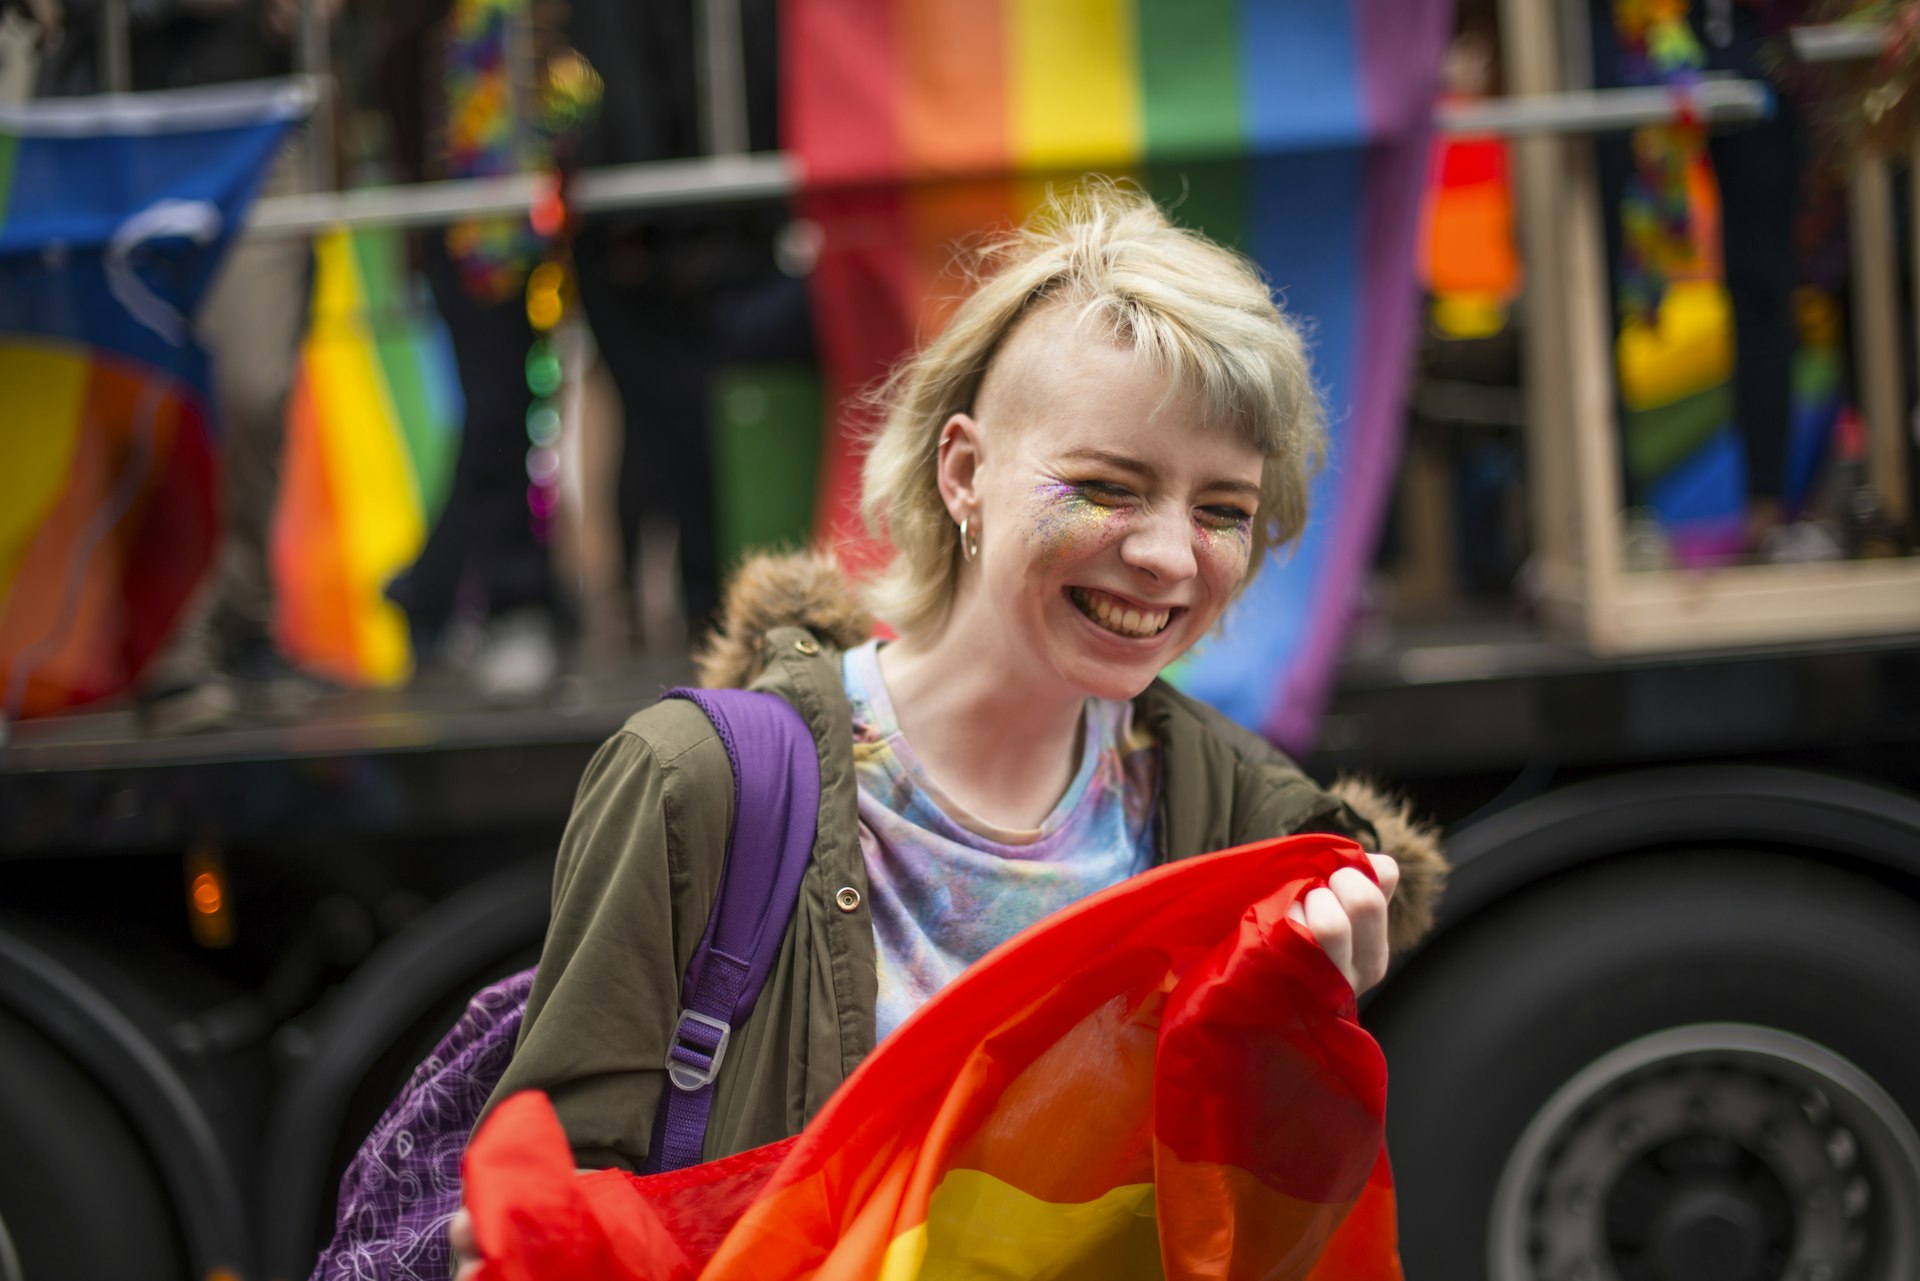 A woman holds a rainbow flag and smiles at the Pride parade, Dublin, Ireland